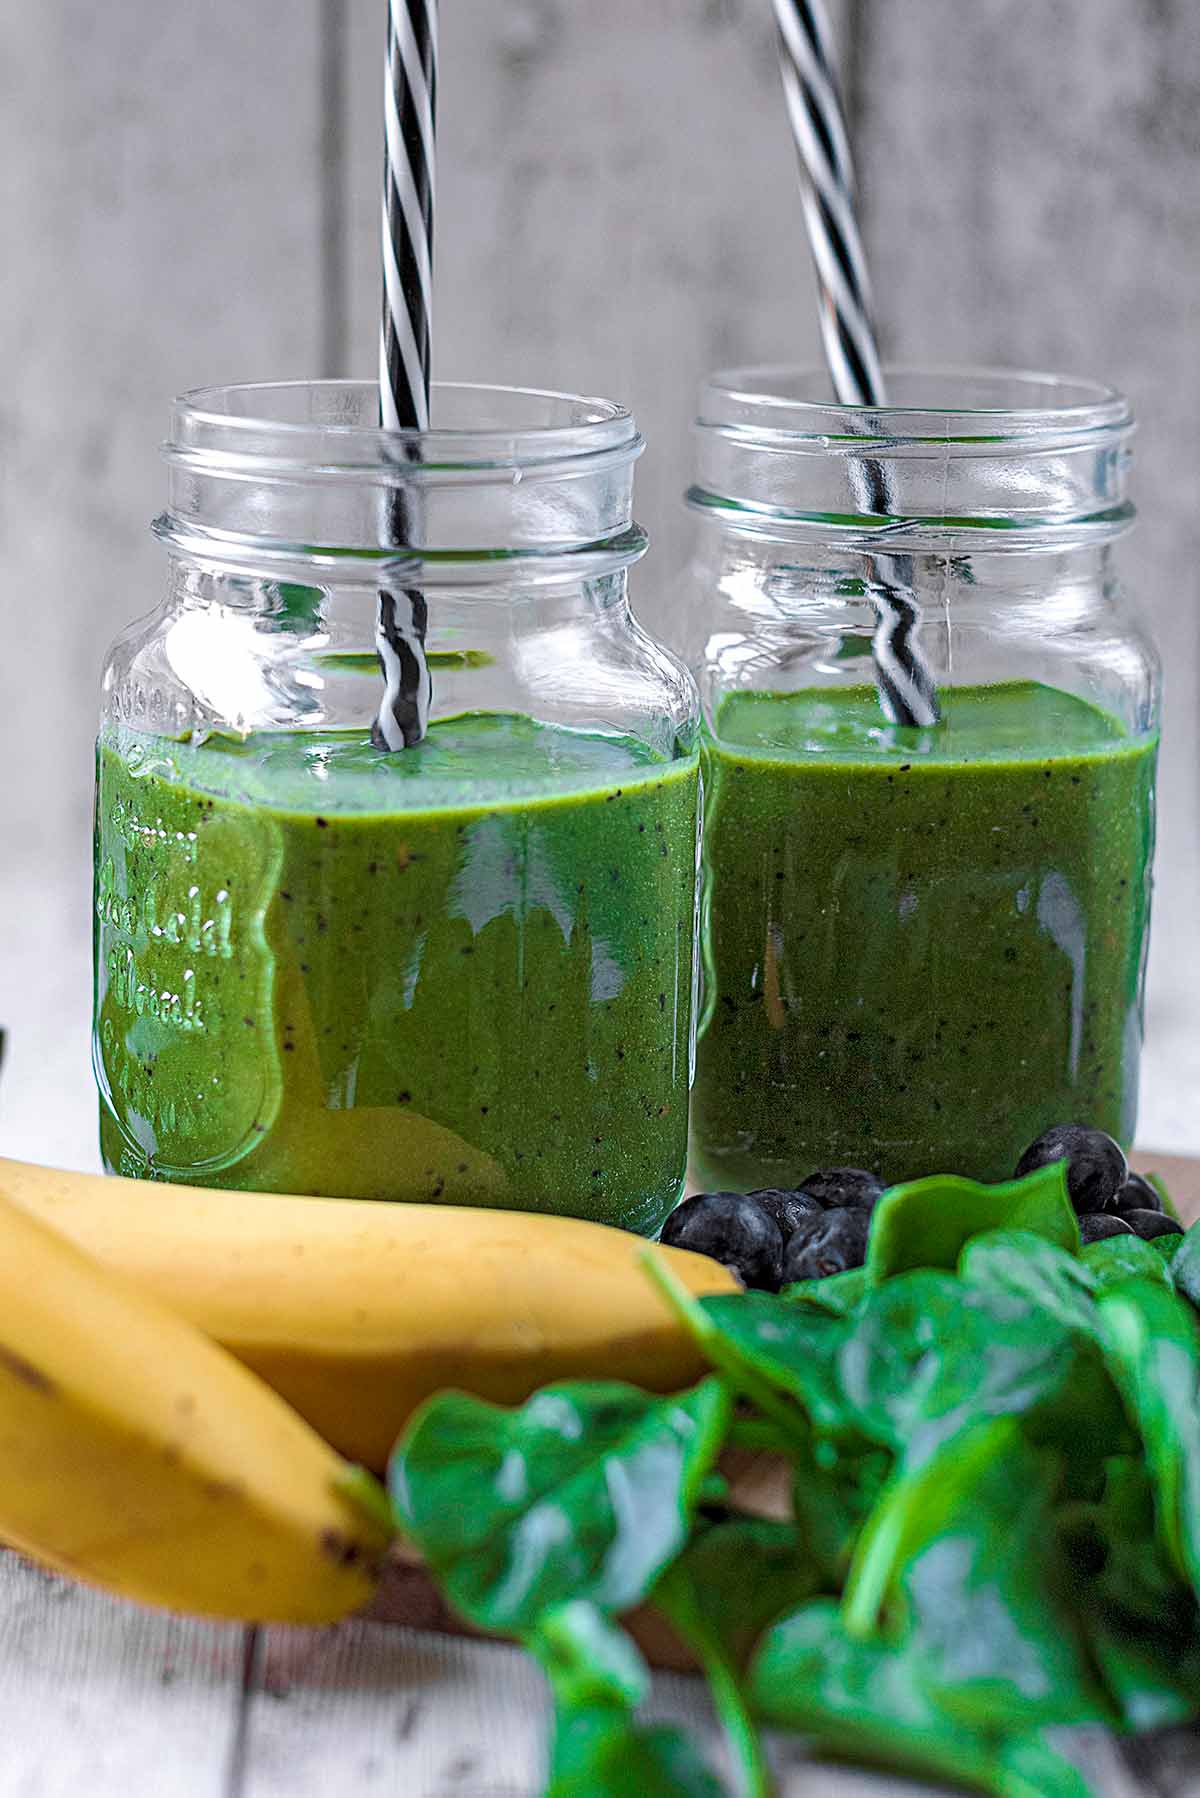 Two jars of green smoothie next to some bananas and a pile of spinach.